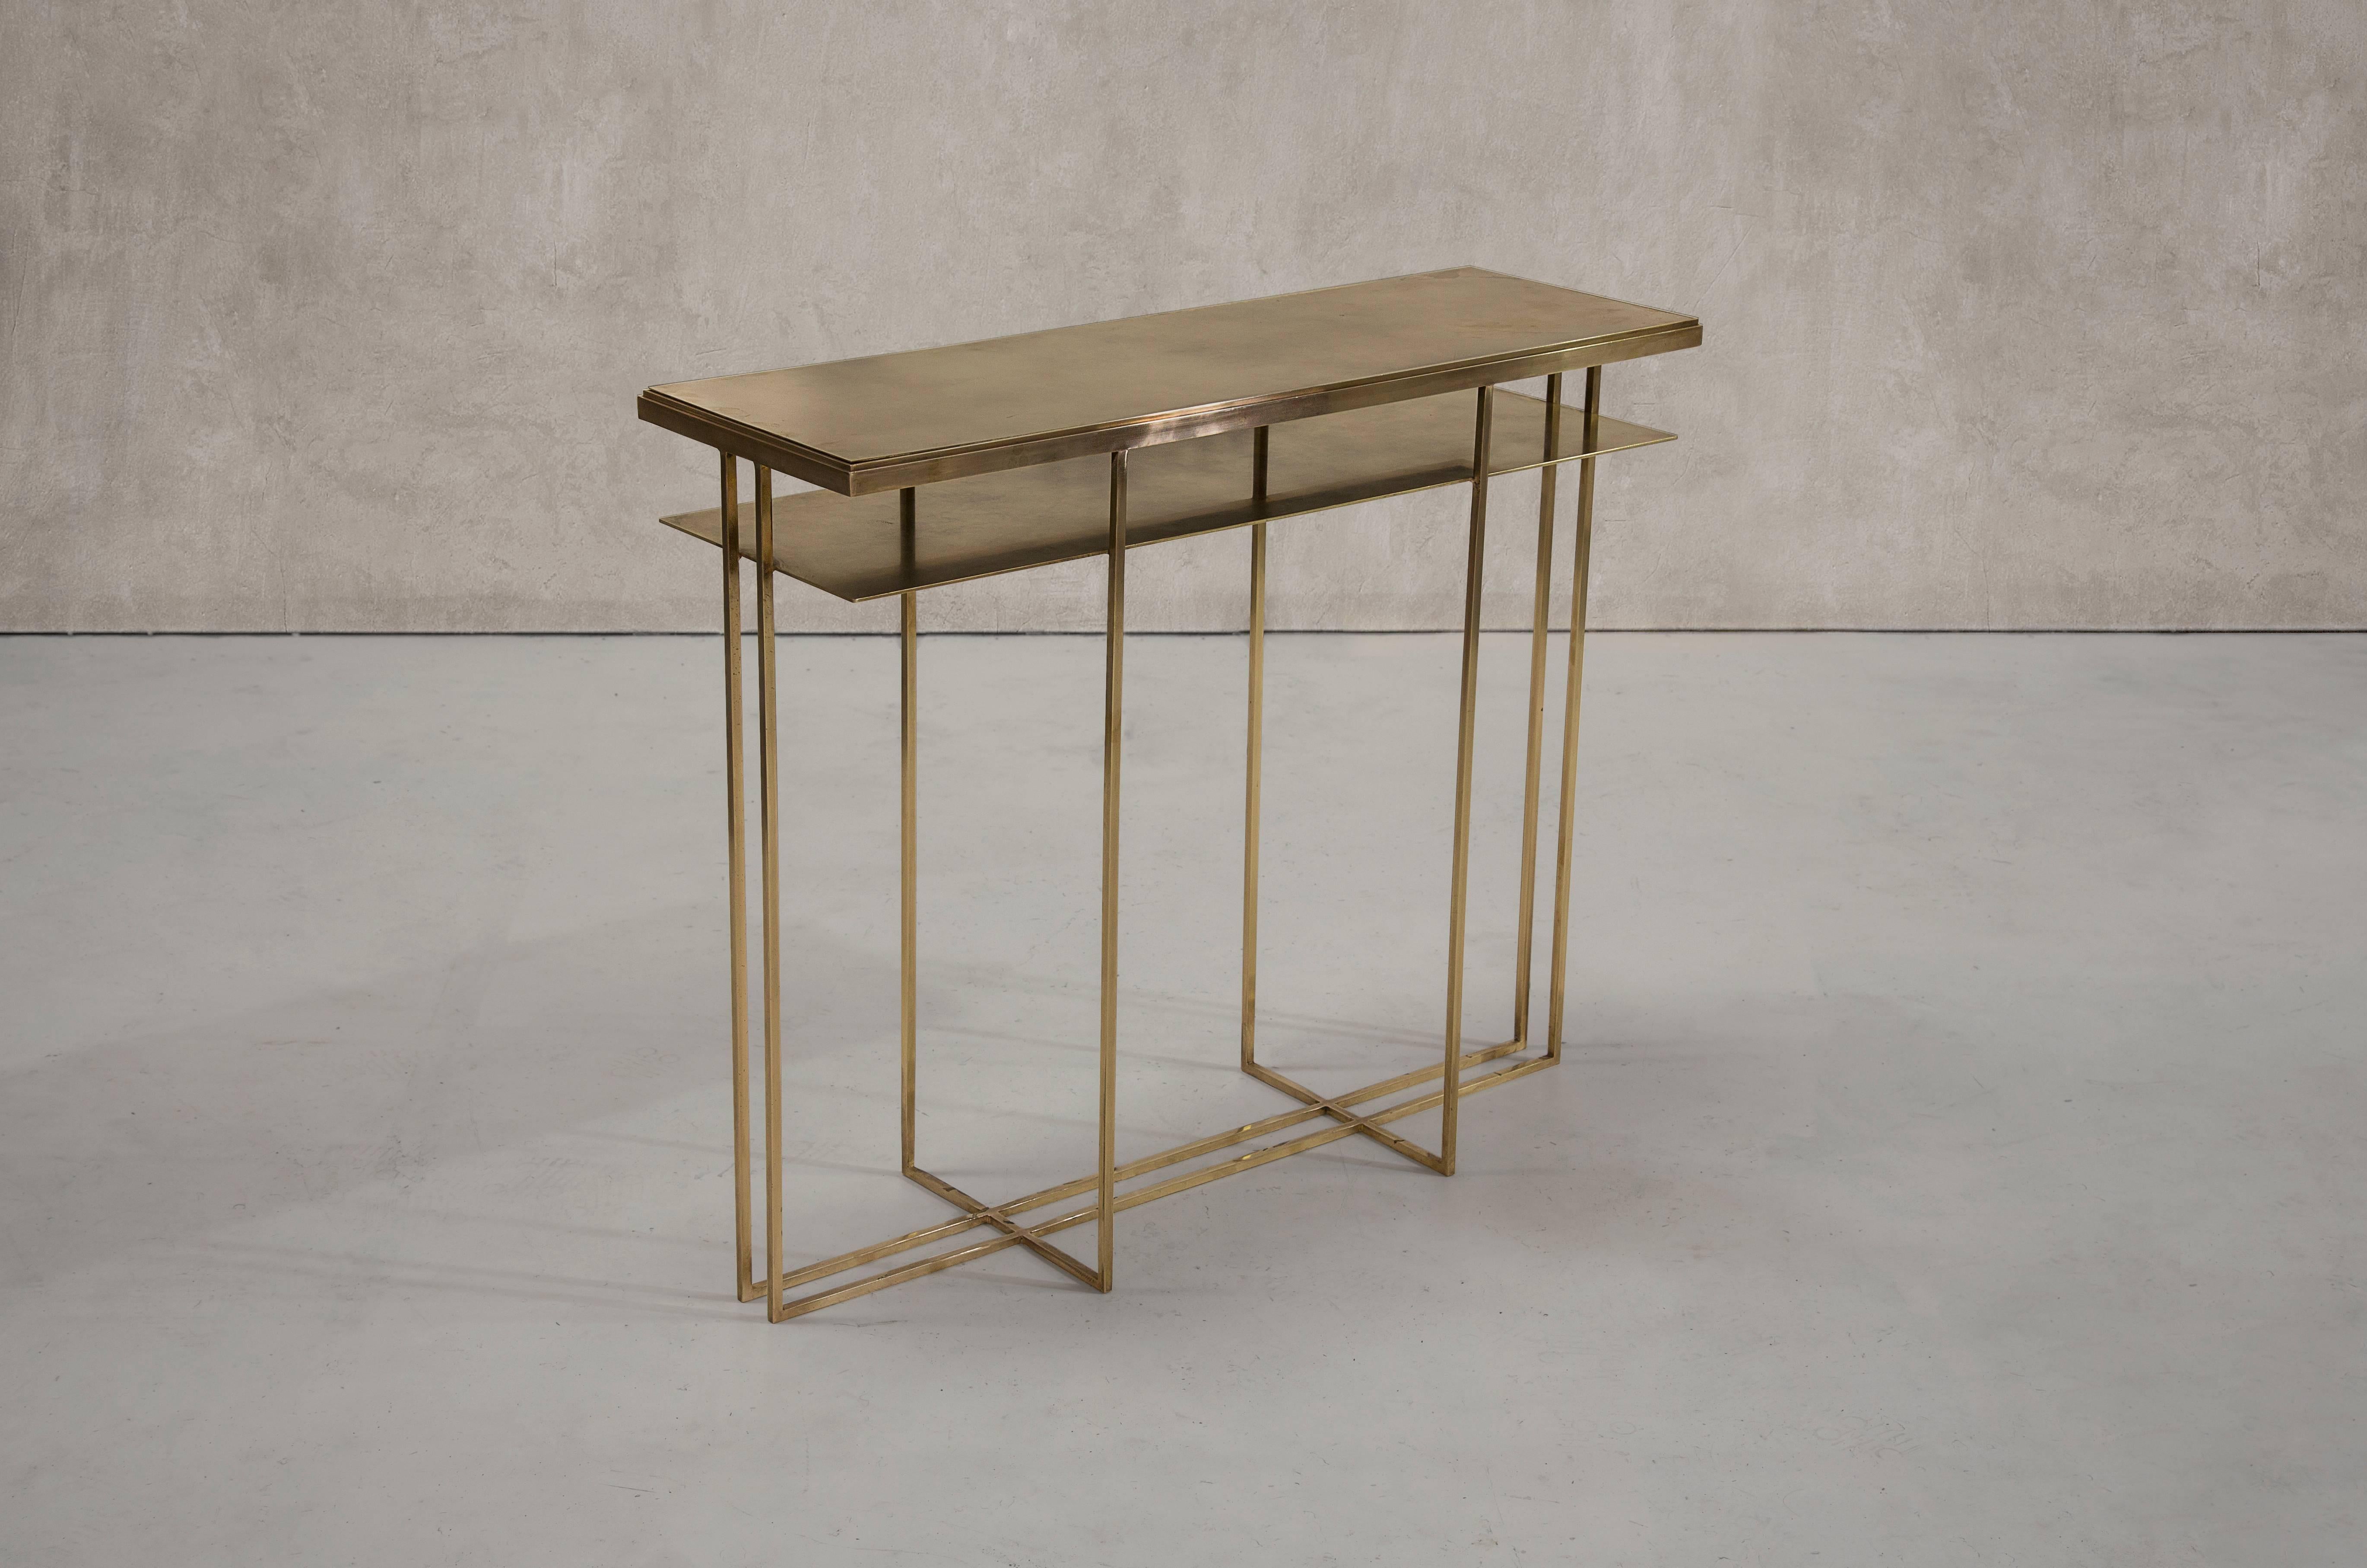 A console table in all patinated brass. Hand crafted to order in the North. Bespoke finishes and sizes are available.

Measures: 150cm (length) x 30cm (width) x 80cm (height). 
Custom sizes available.

Made to order in 12 weeks.
Price excludes VAT.